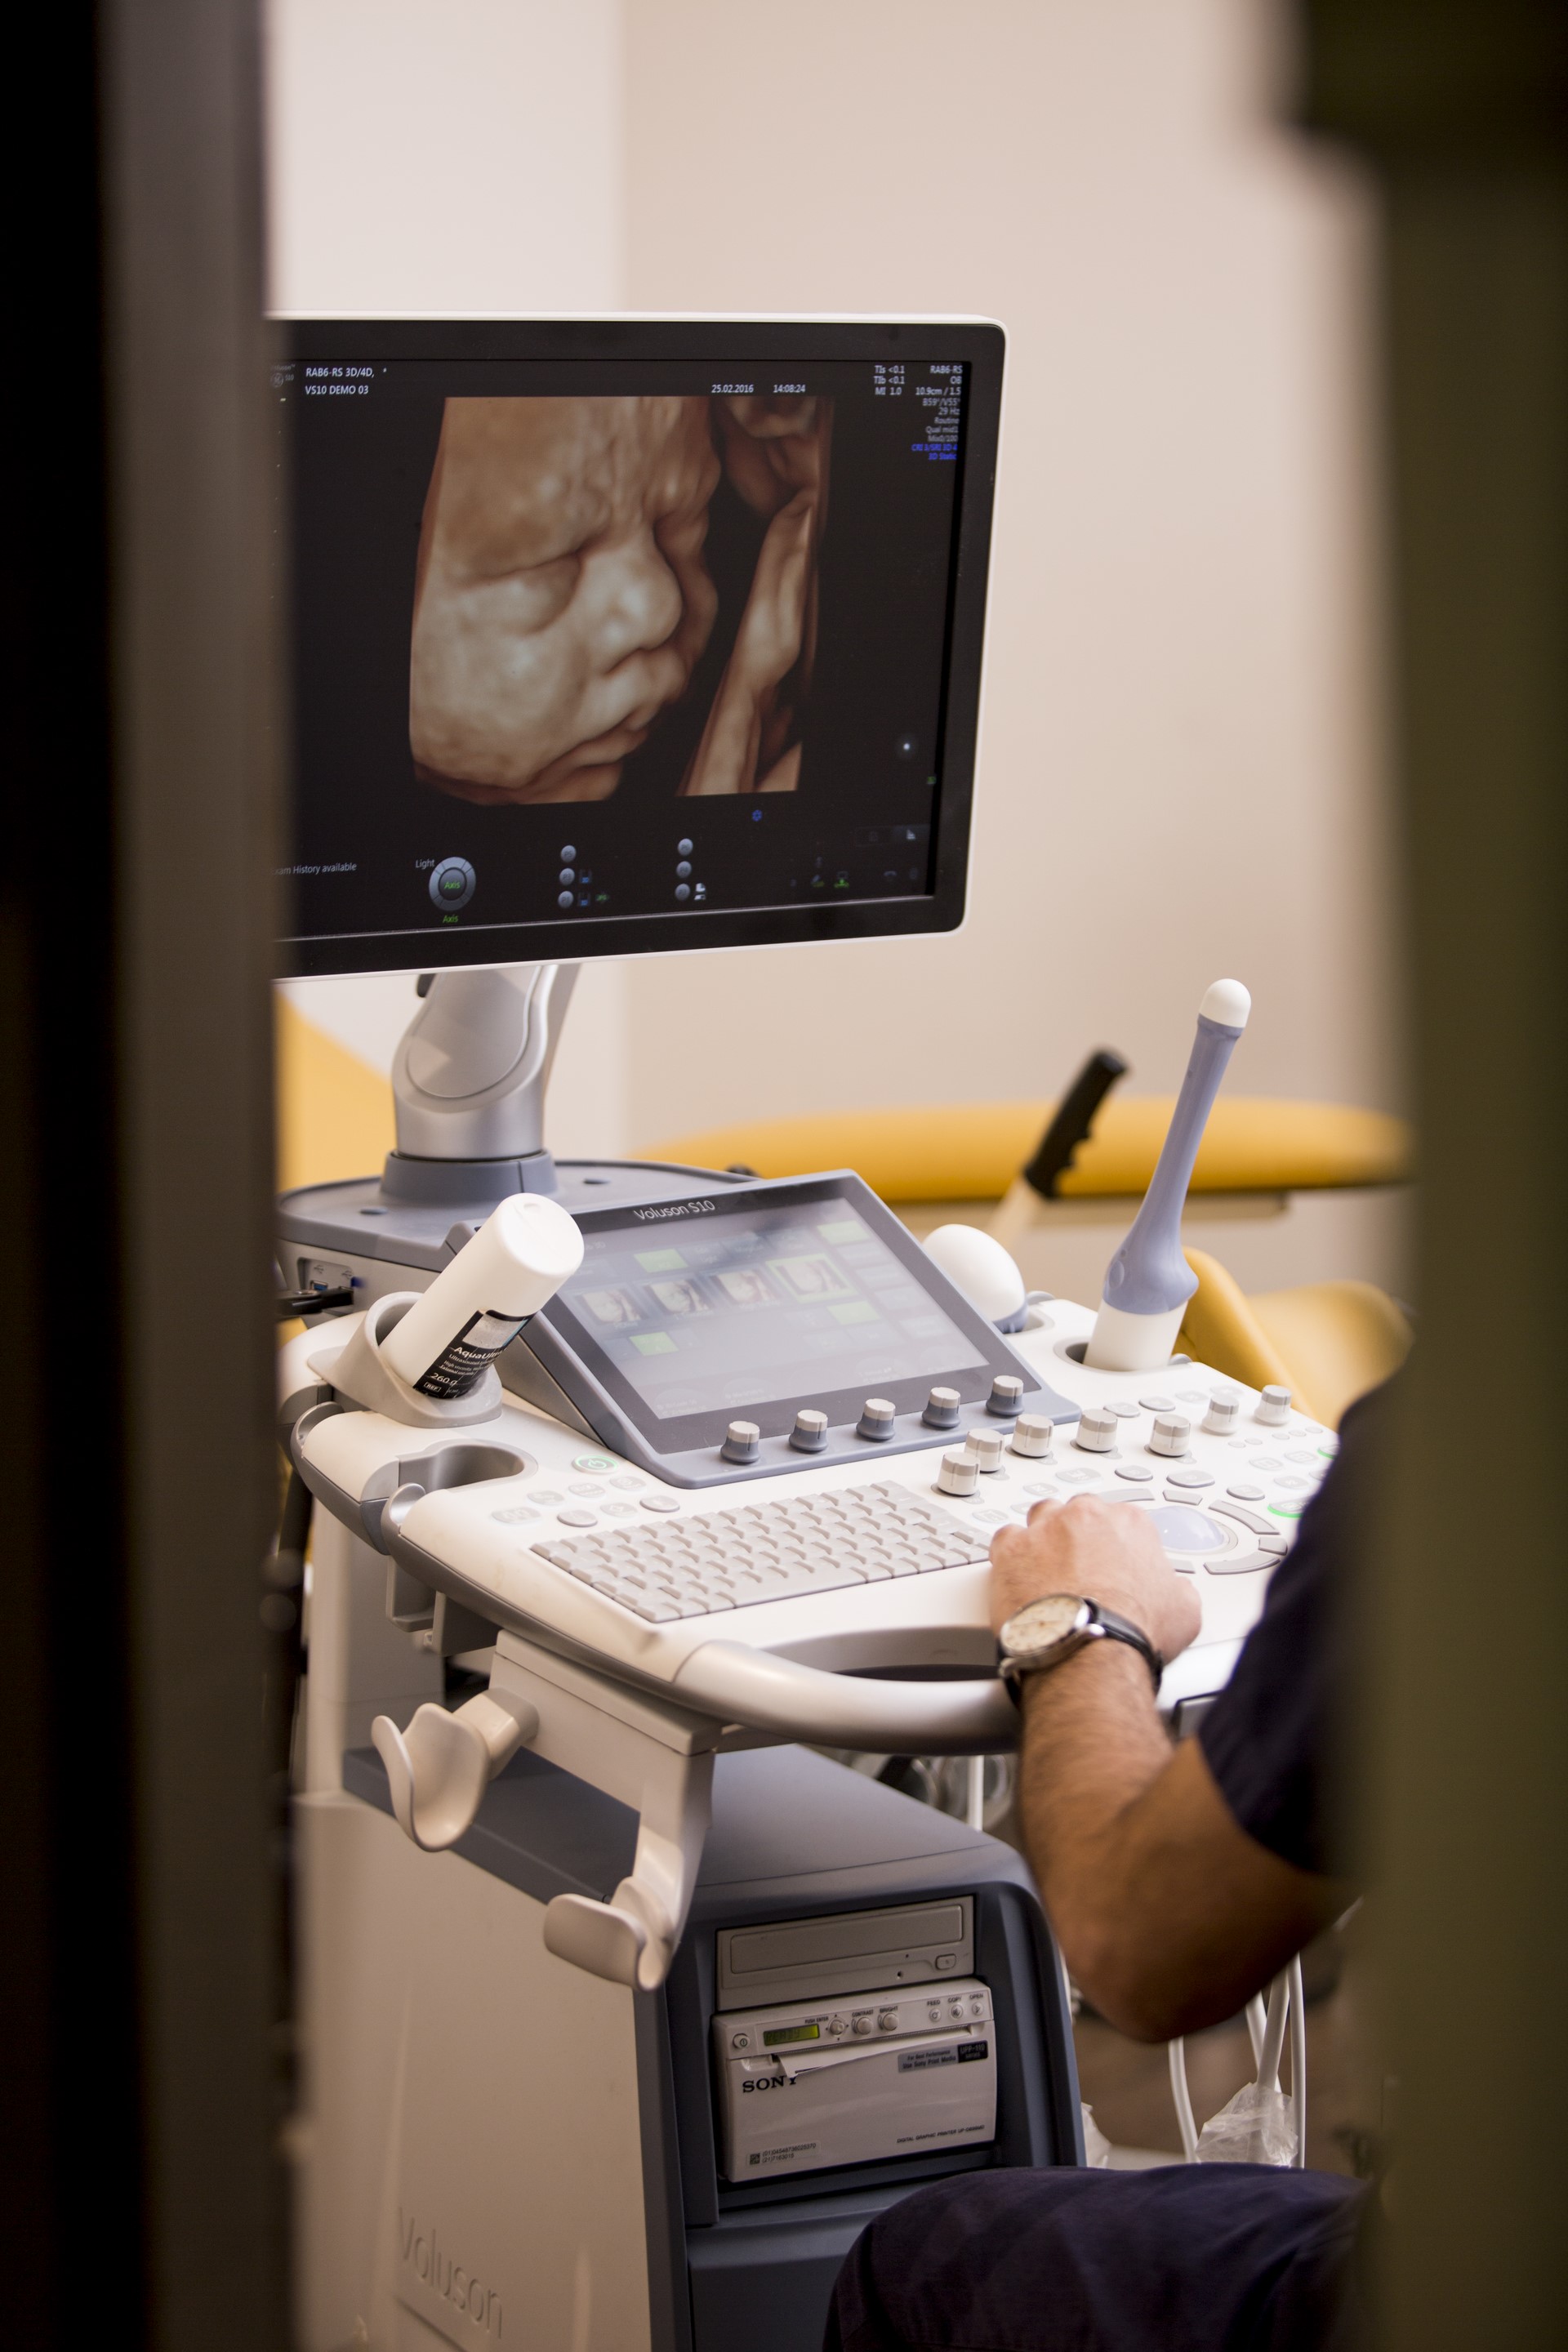 Ongoing pregnancy. Ultrasound imaging of an embryo at 14 weeks of gestation.